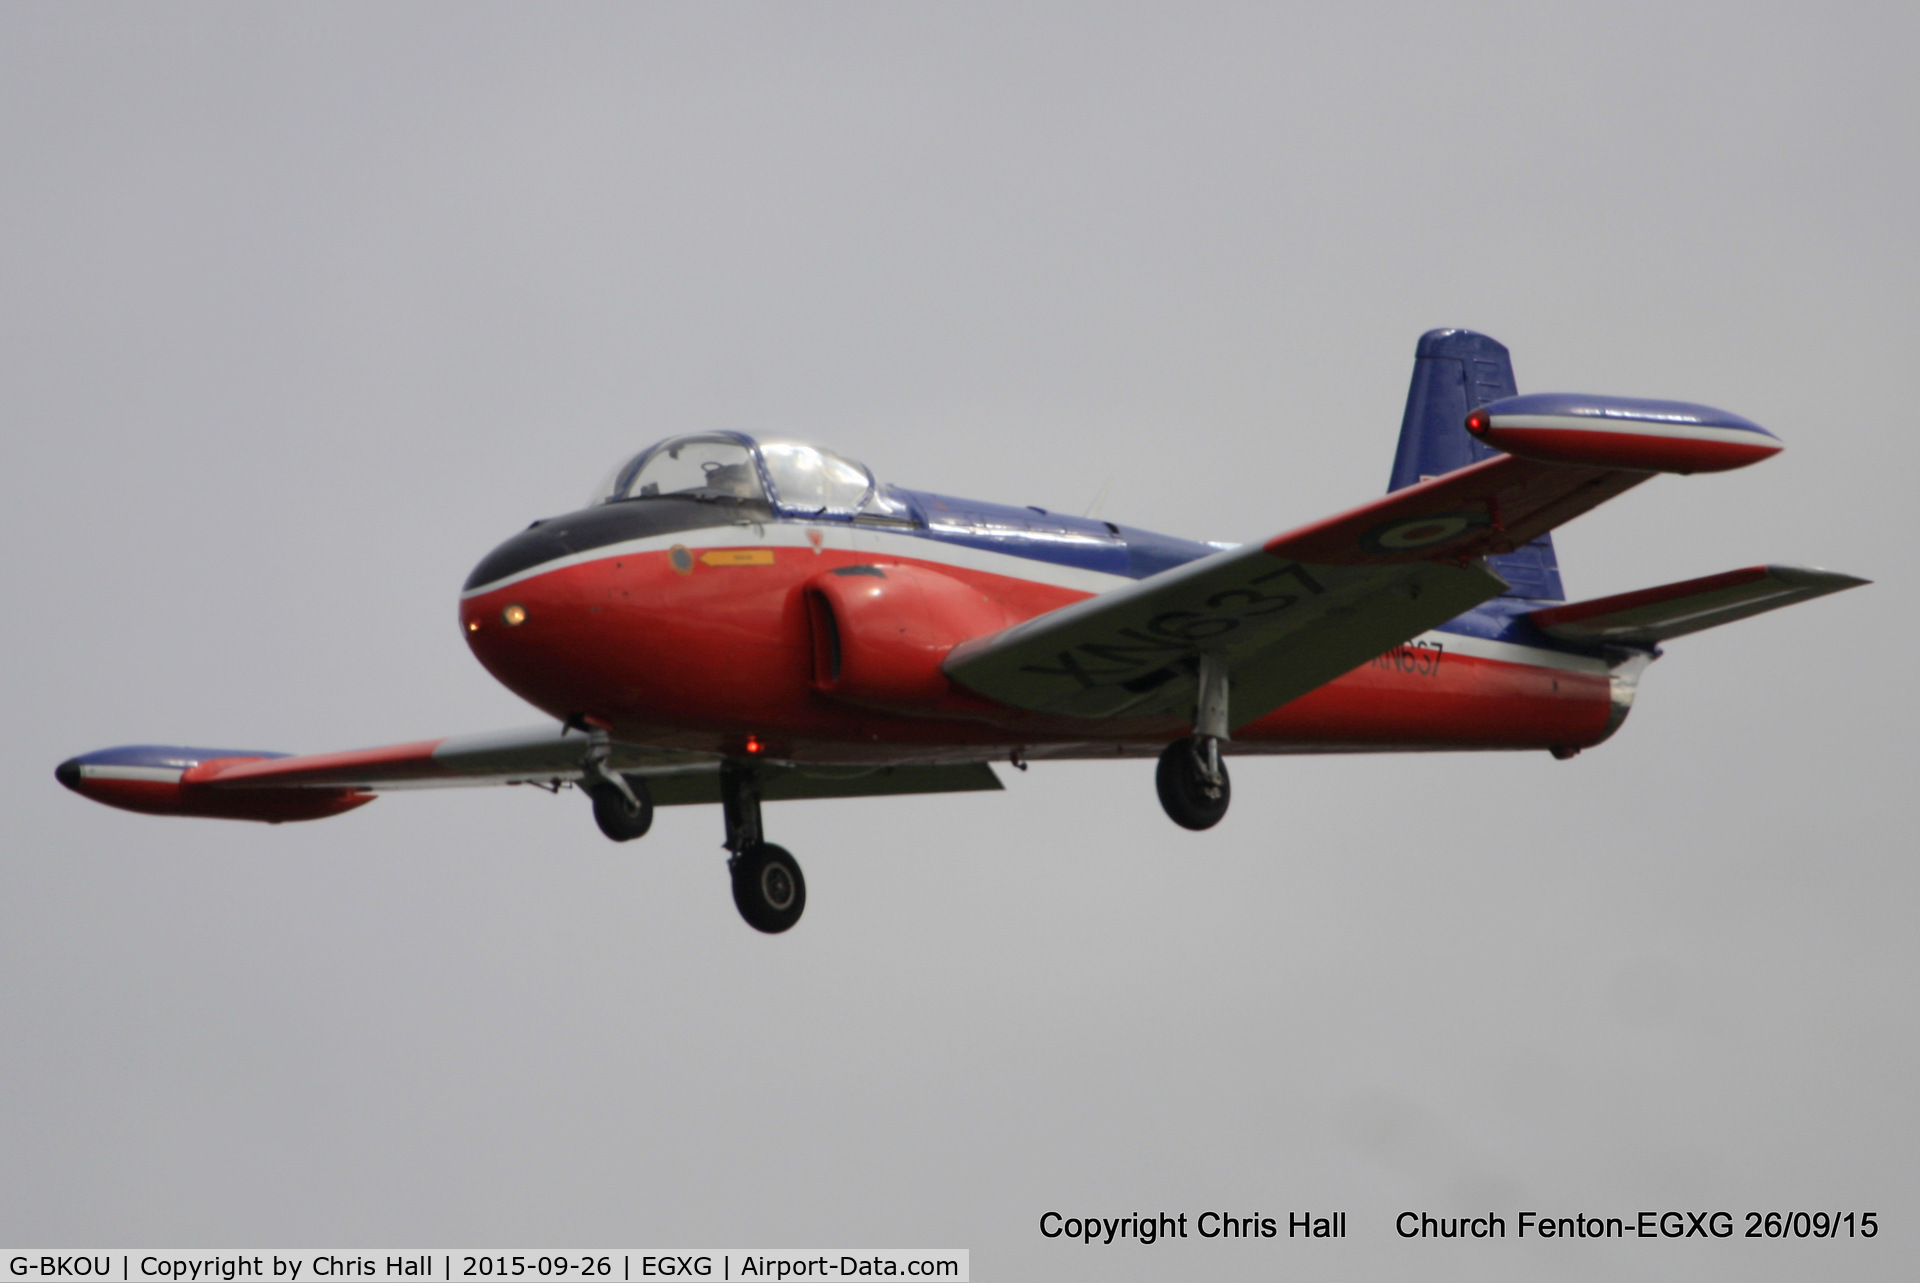 G-BKOU, 1961 Hunting P-84 Jet Provost T.3 C/N PAC/W/13901, at the Yorkshire Airshow